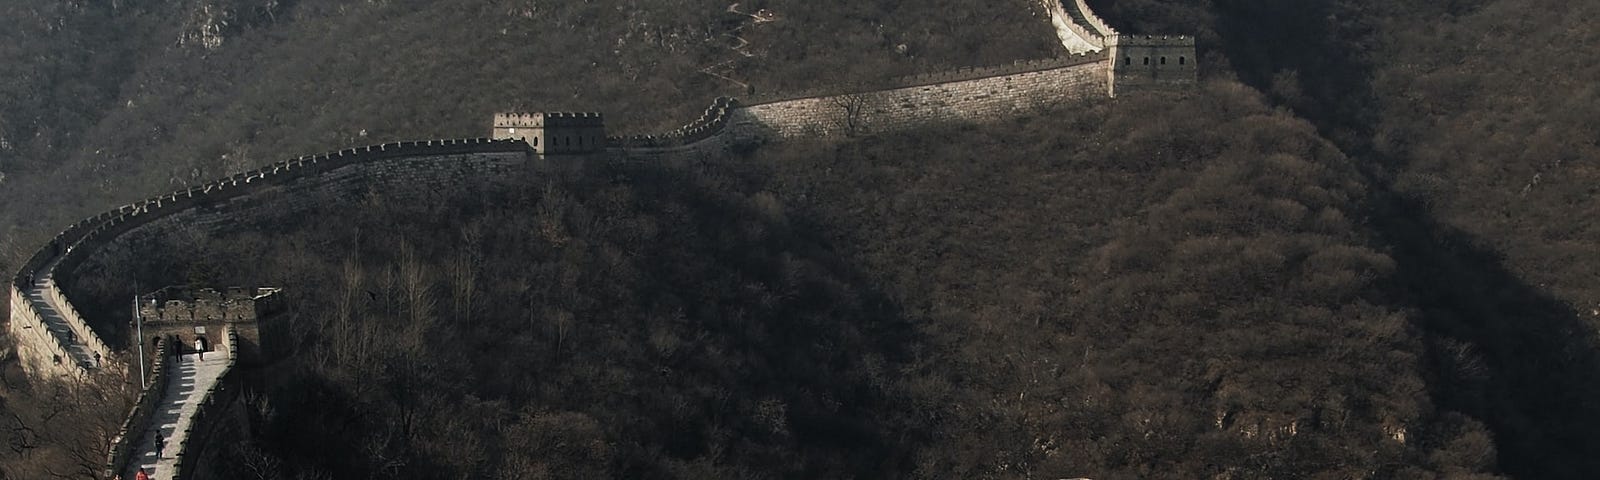 IMAGE: An image of the Great Wall of China